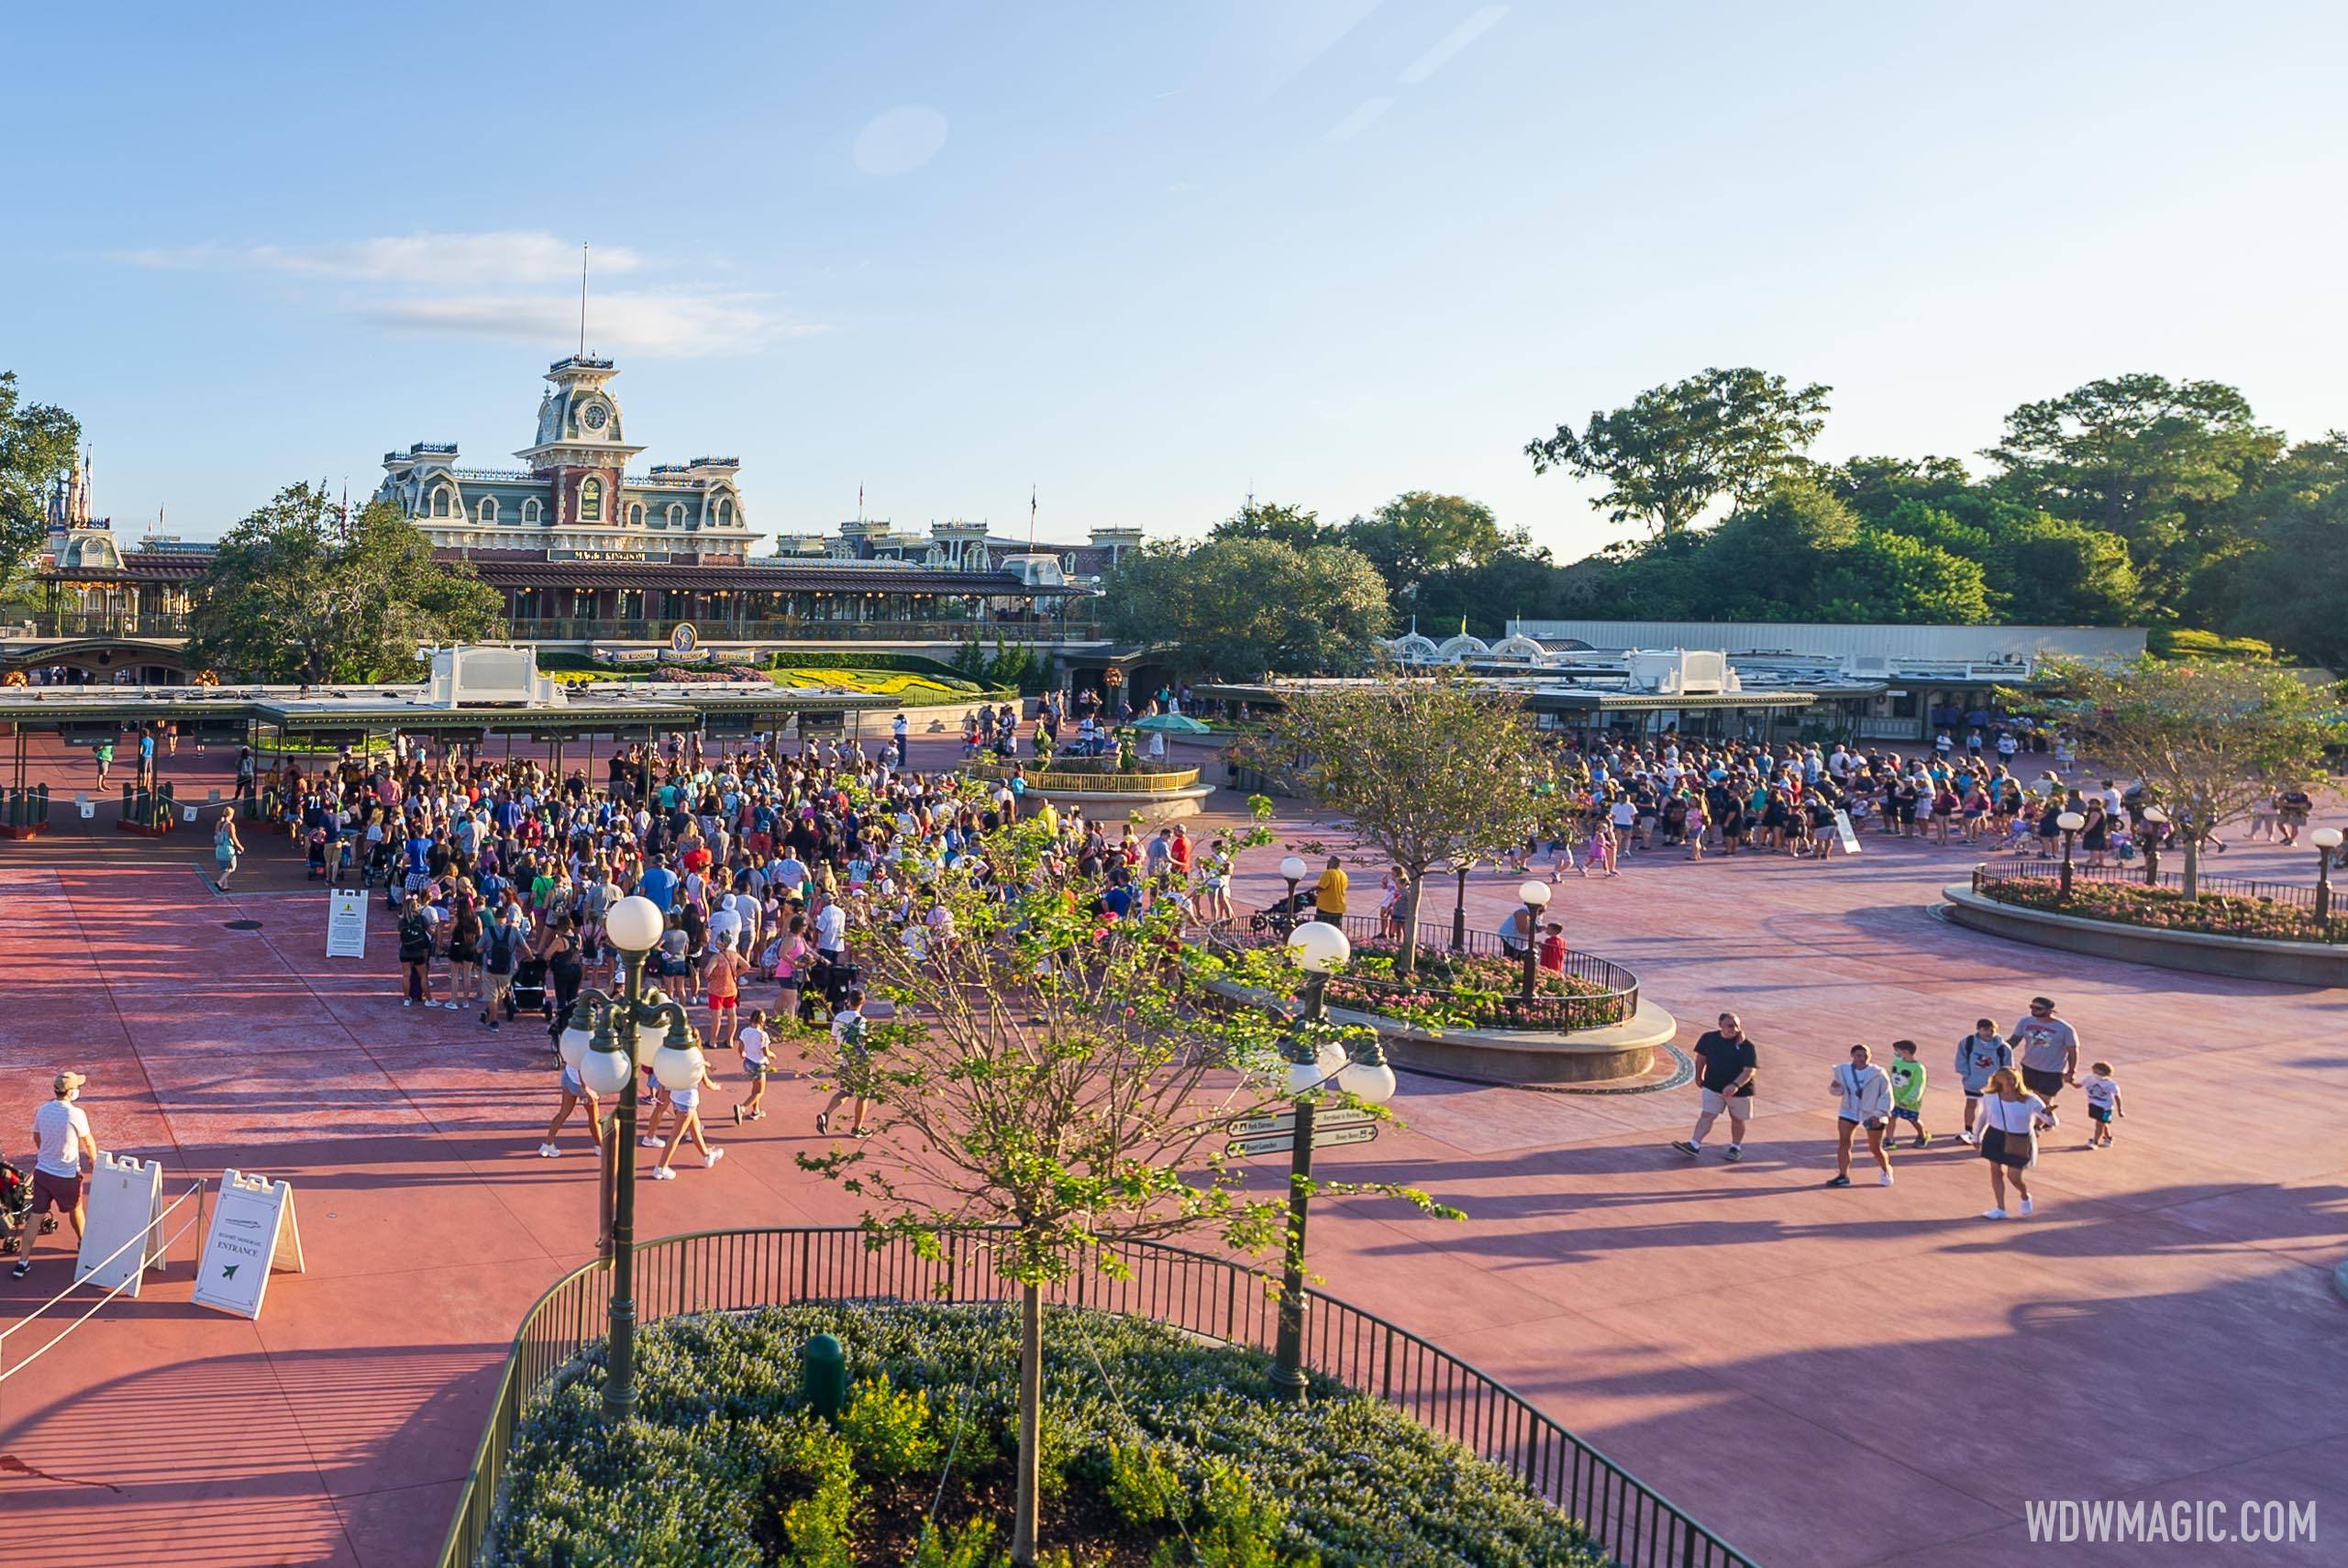 How Early Theme Parks Entry works for Walt Disney World Resort hotels guests and those staying offsite